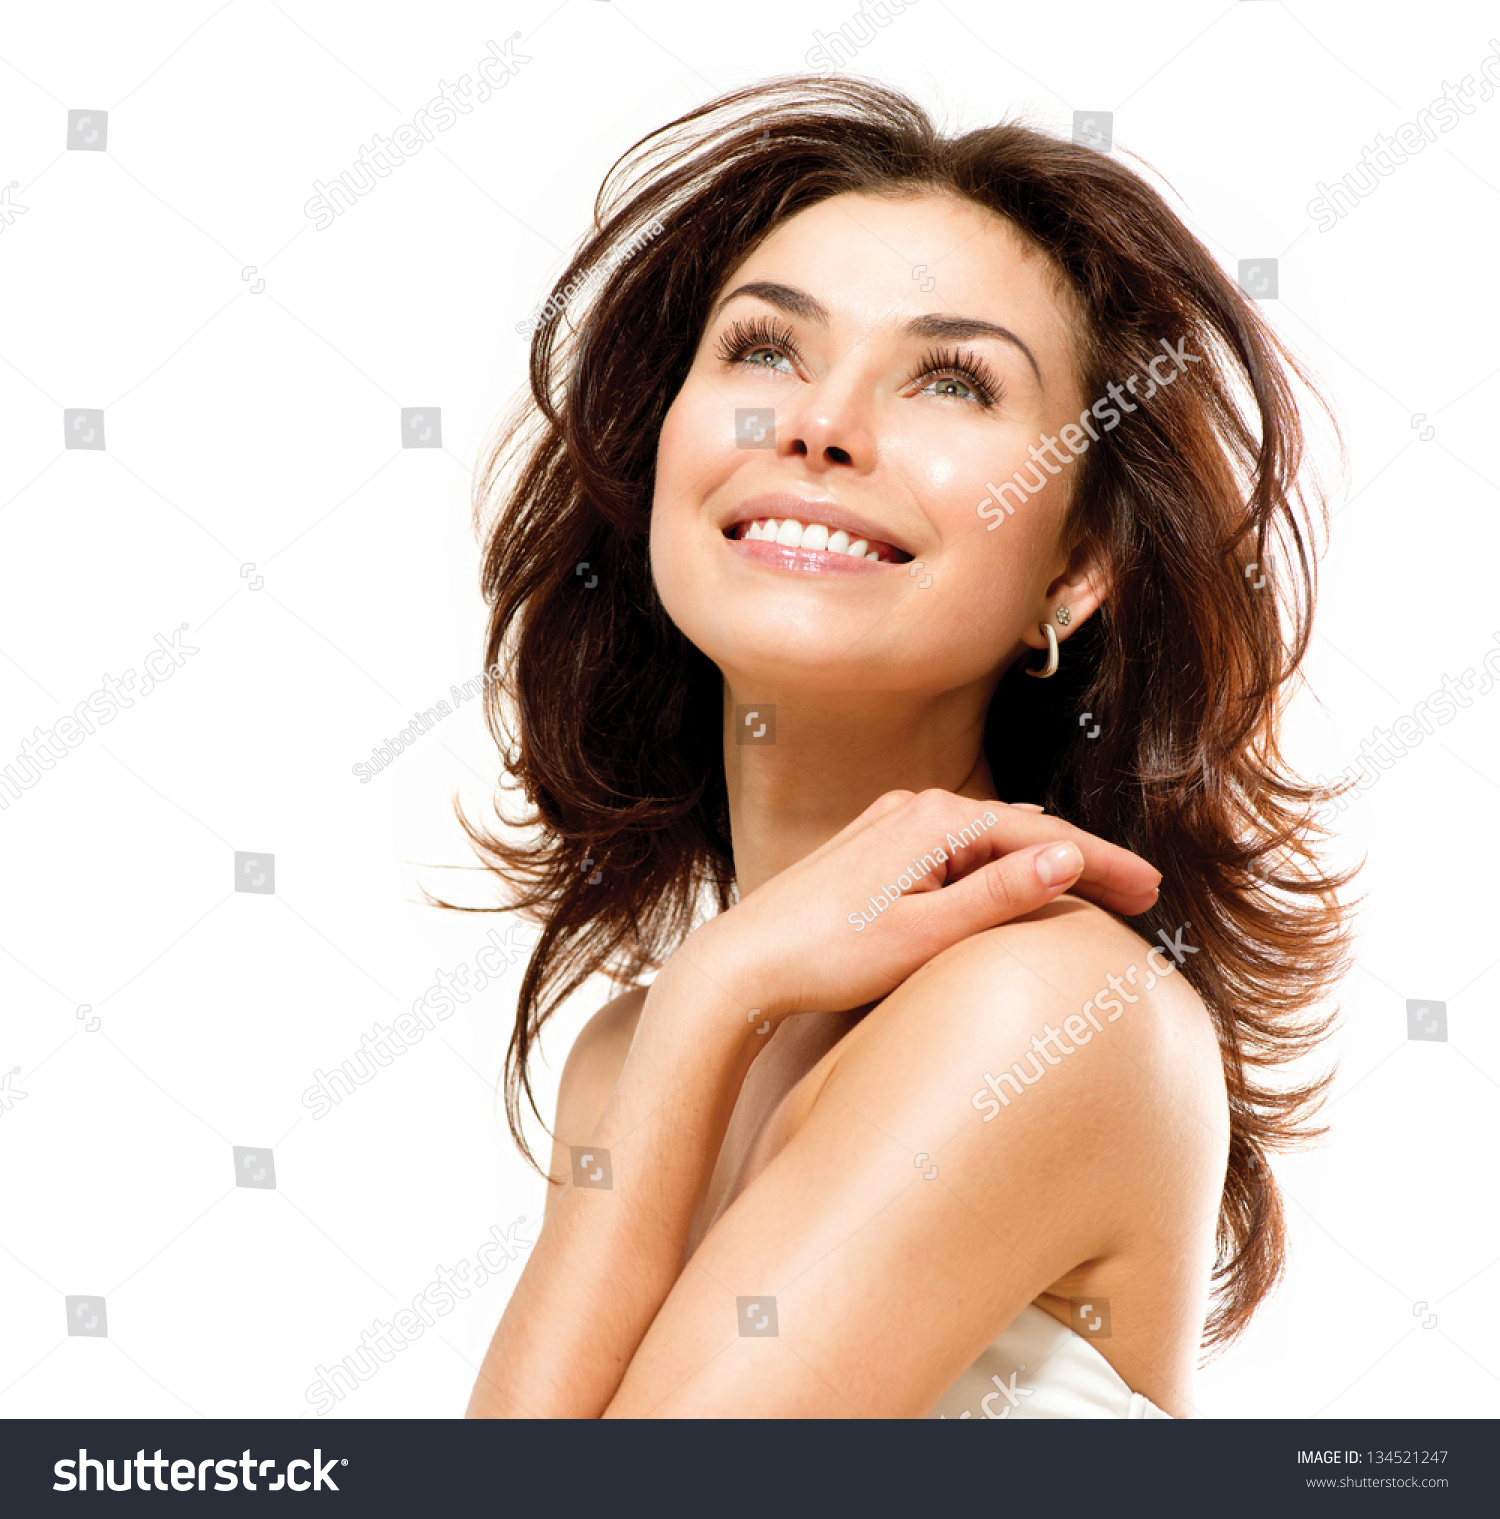 Beauty Woman. Beautiful Young Female touching Her Skin. Portrait isolated on White Background. Healthcare. Perfect Skin. Beauty Face. #134521247